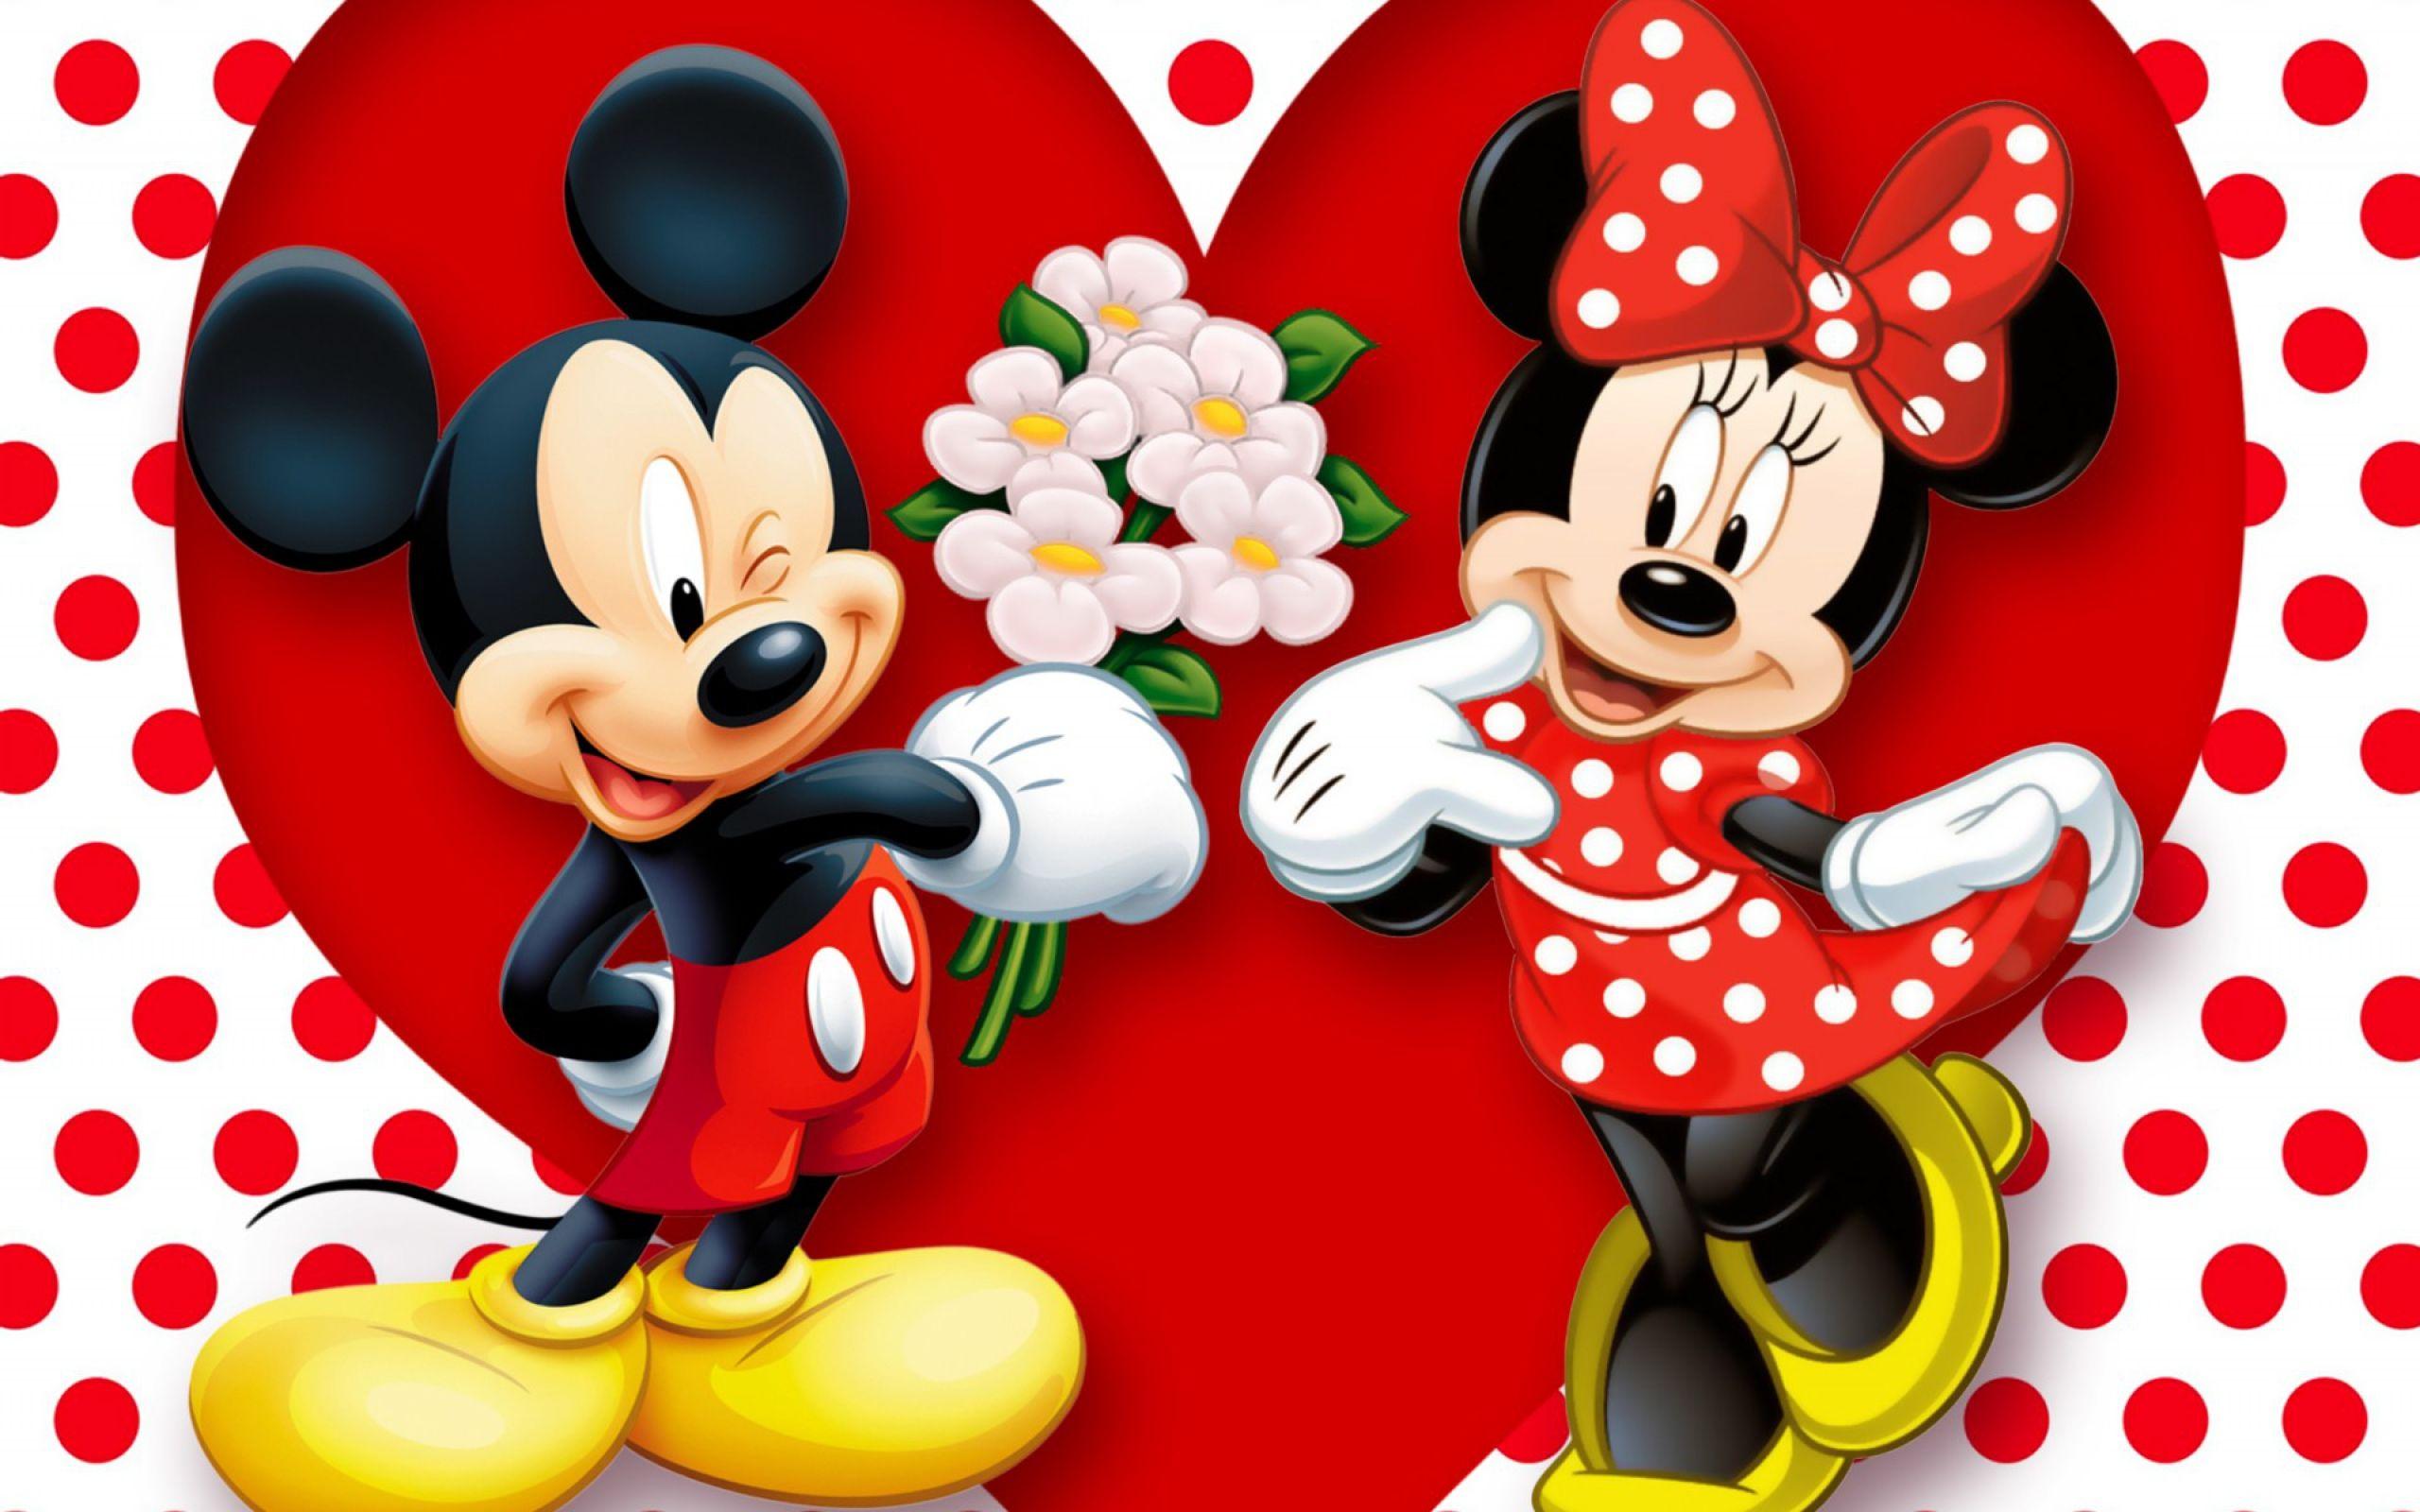 Free: Mickey Mouse illustration, The Talking Mickey Mouse Minnie Mouse The  Walt Disney Company Television show, Mickey Mouse, heroes, computer  Wallpaper, cartoon png - nohat.cc